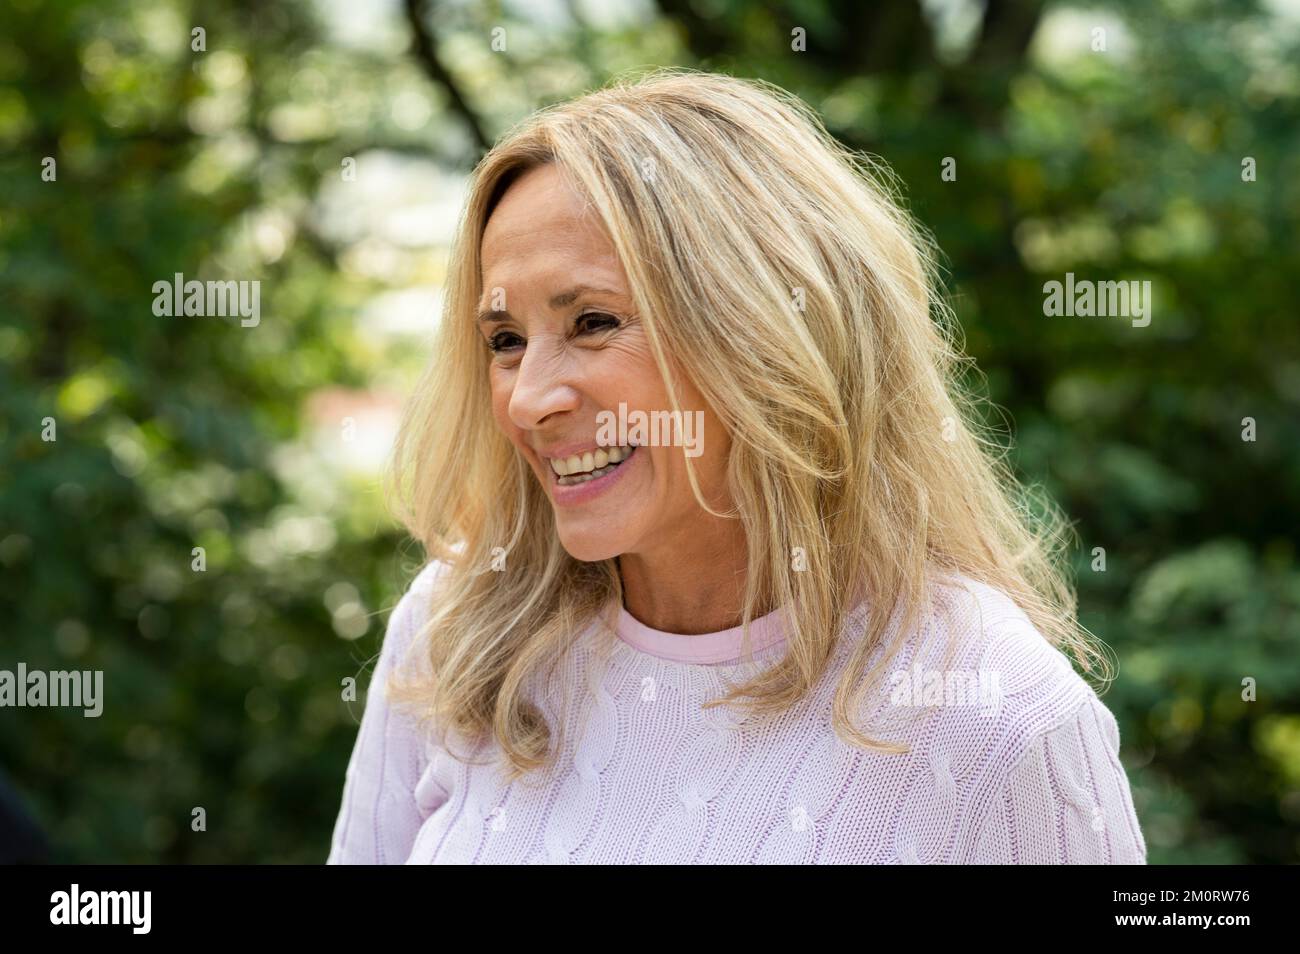 Portrait of middle aged woman smiling while enjoying time outdoors Stock Photo